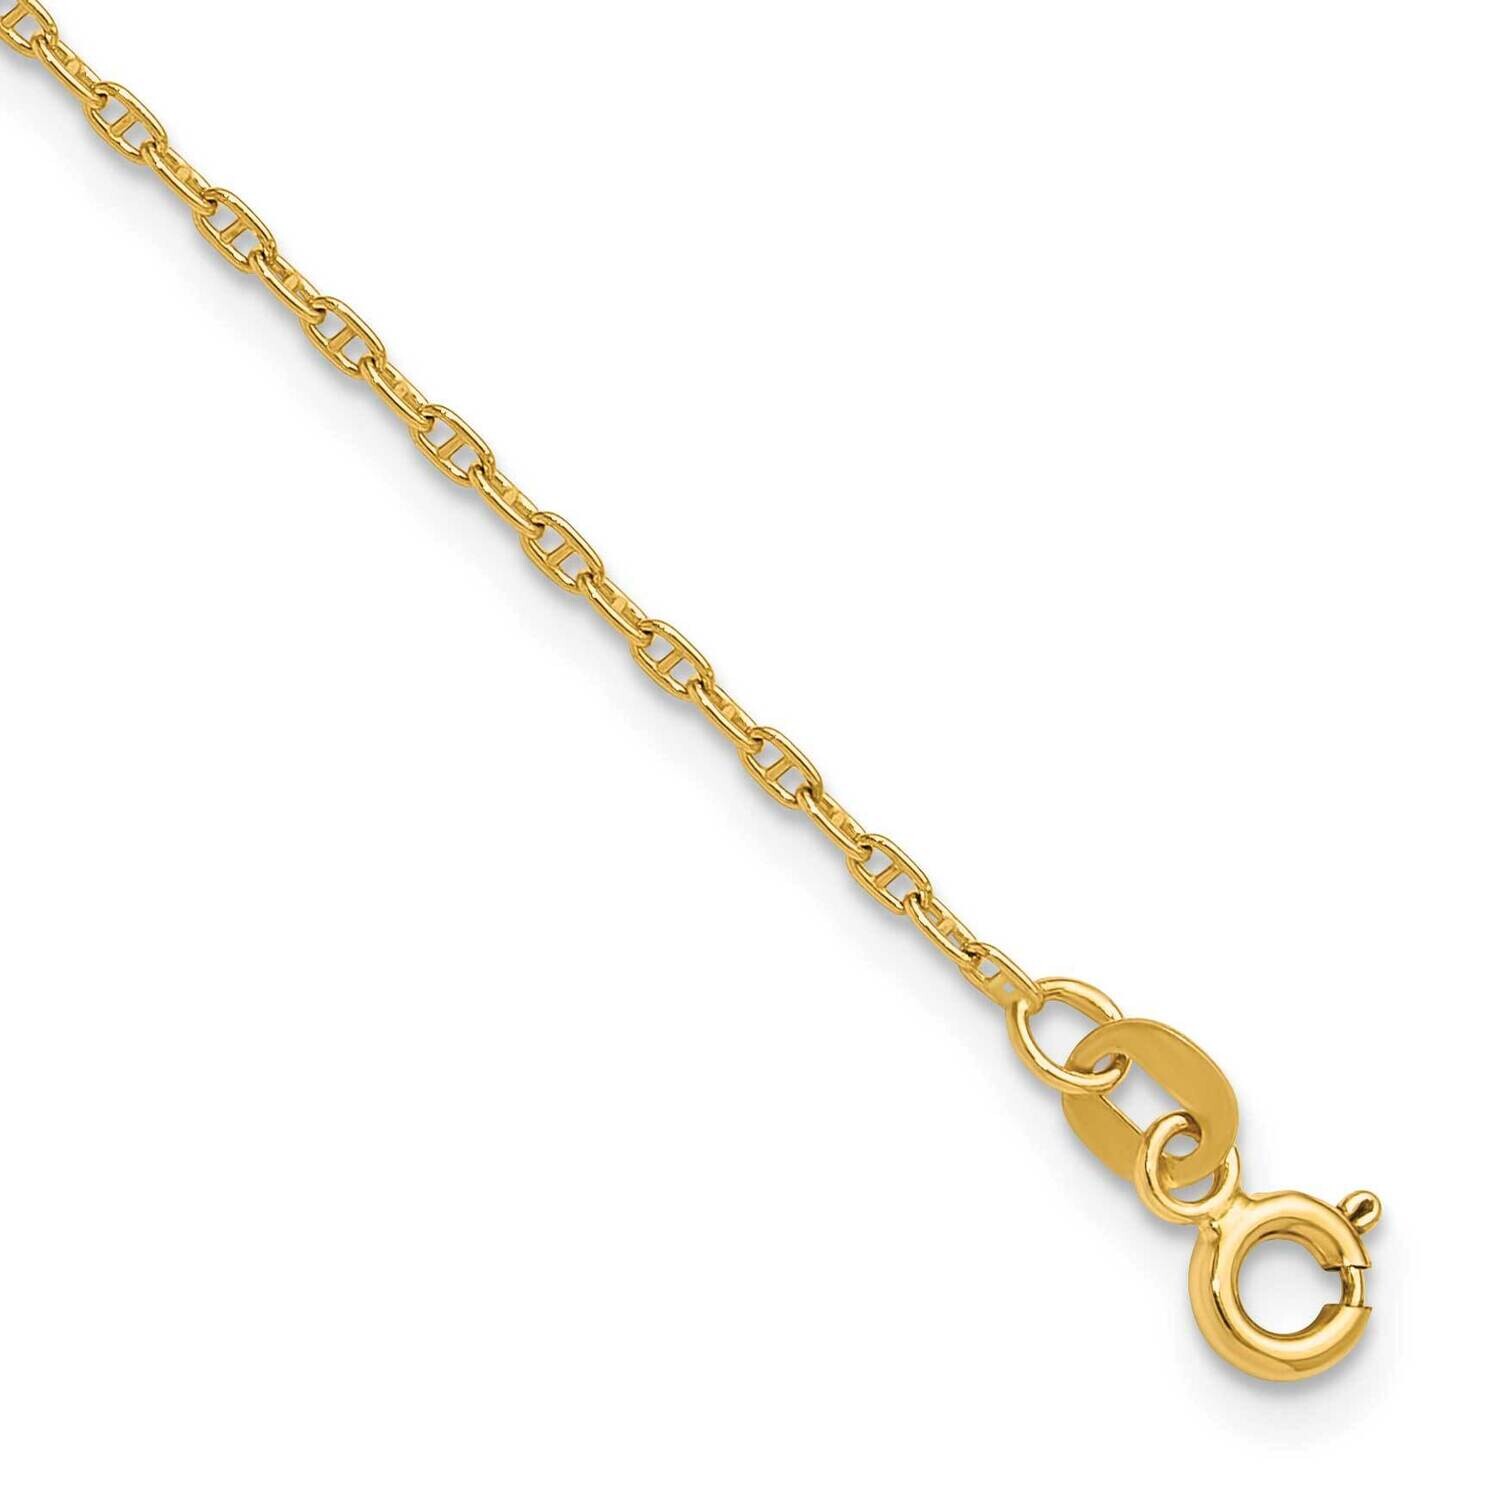 1.5mm Mariners Link Chain 8 Inch 14k Gold MA040-8